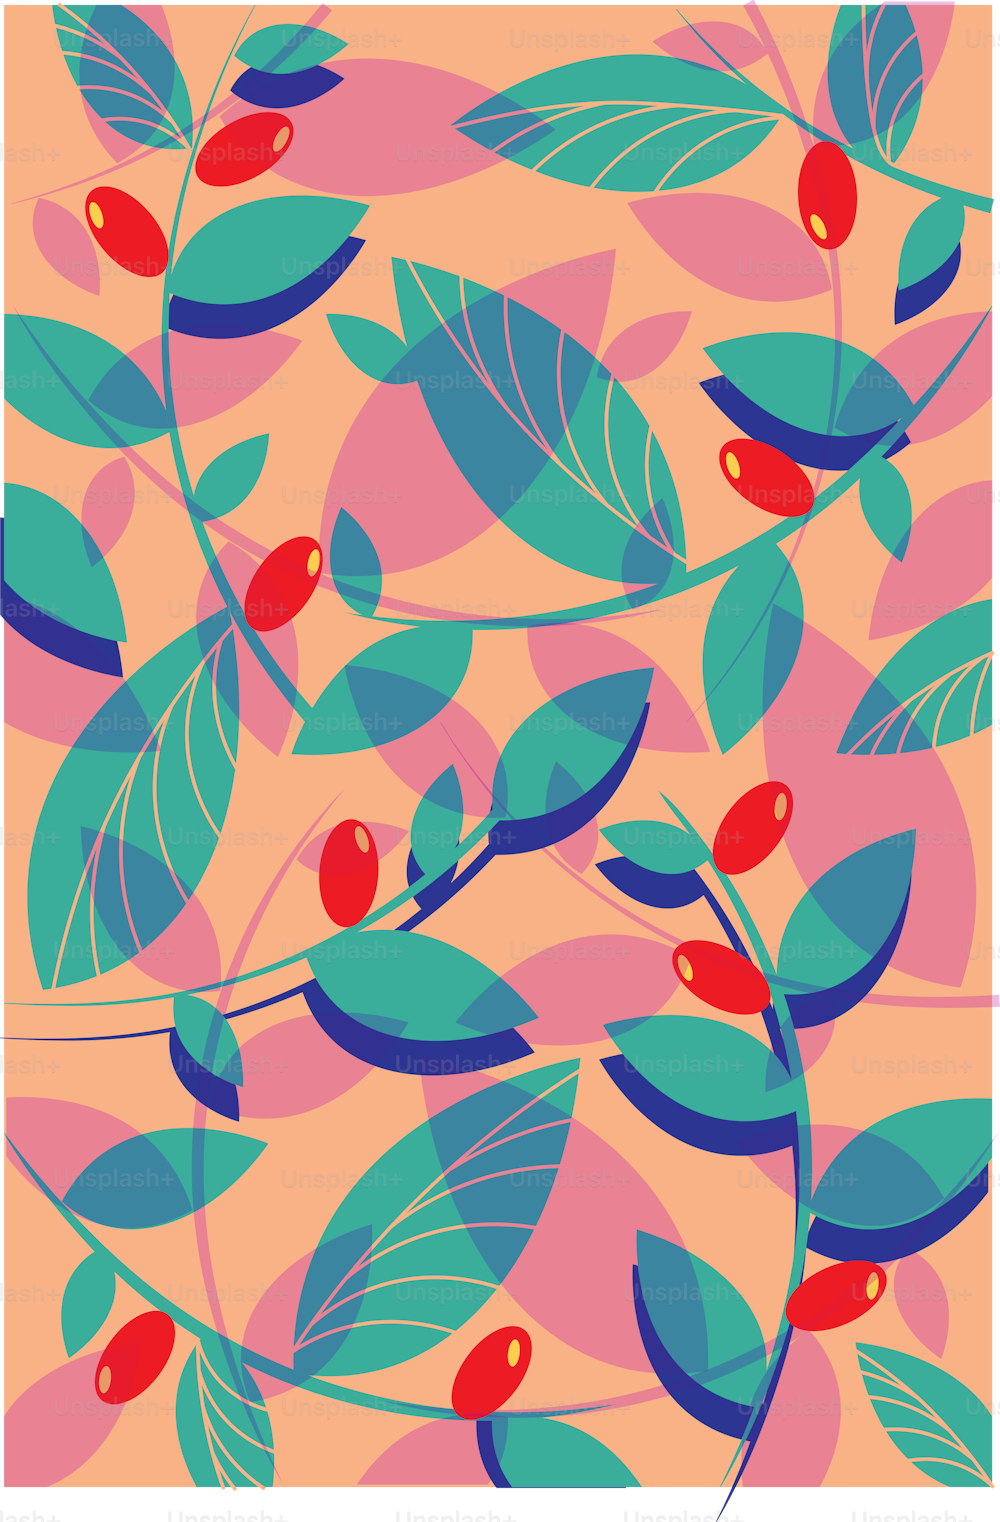 Multilayered floral pattern. Fashion style for fabric and textile. Flat design, bright colors. Summer, springtime. Vector illustration.